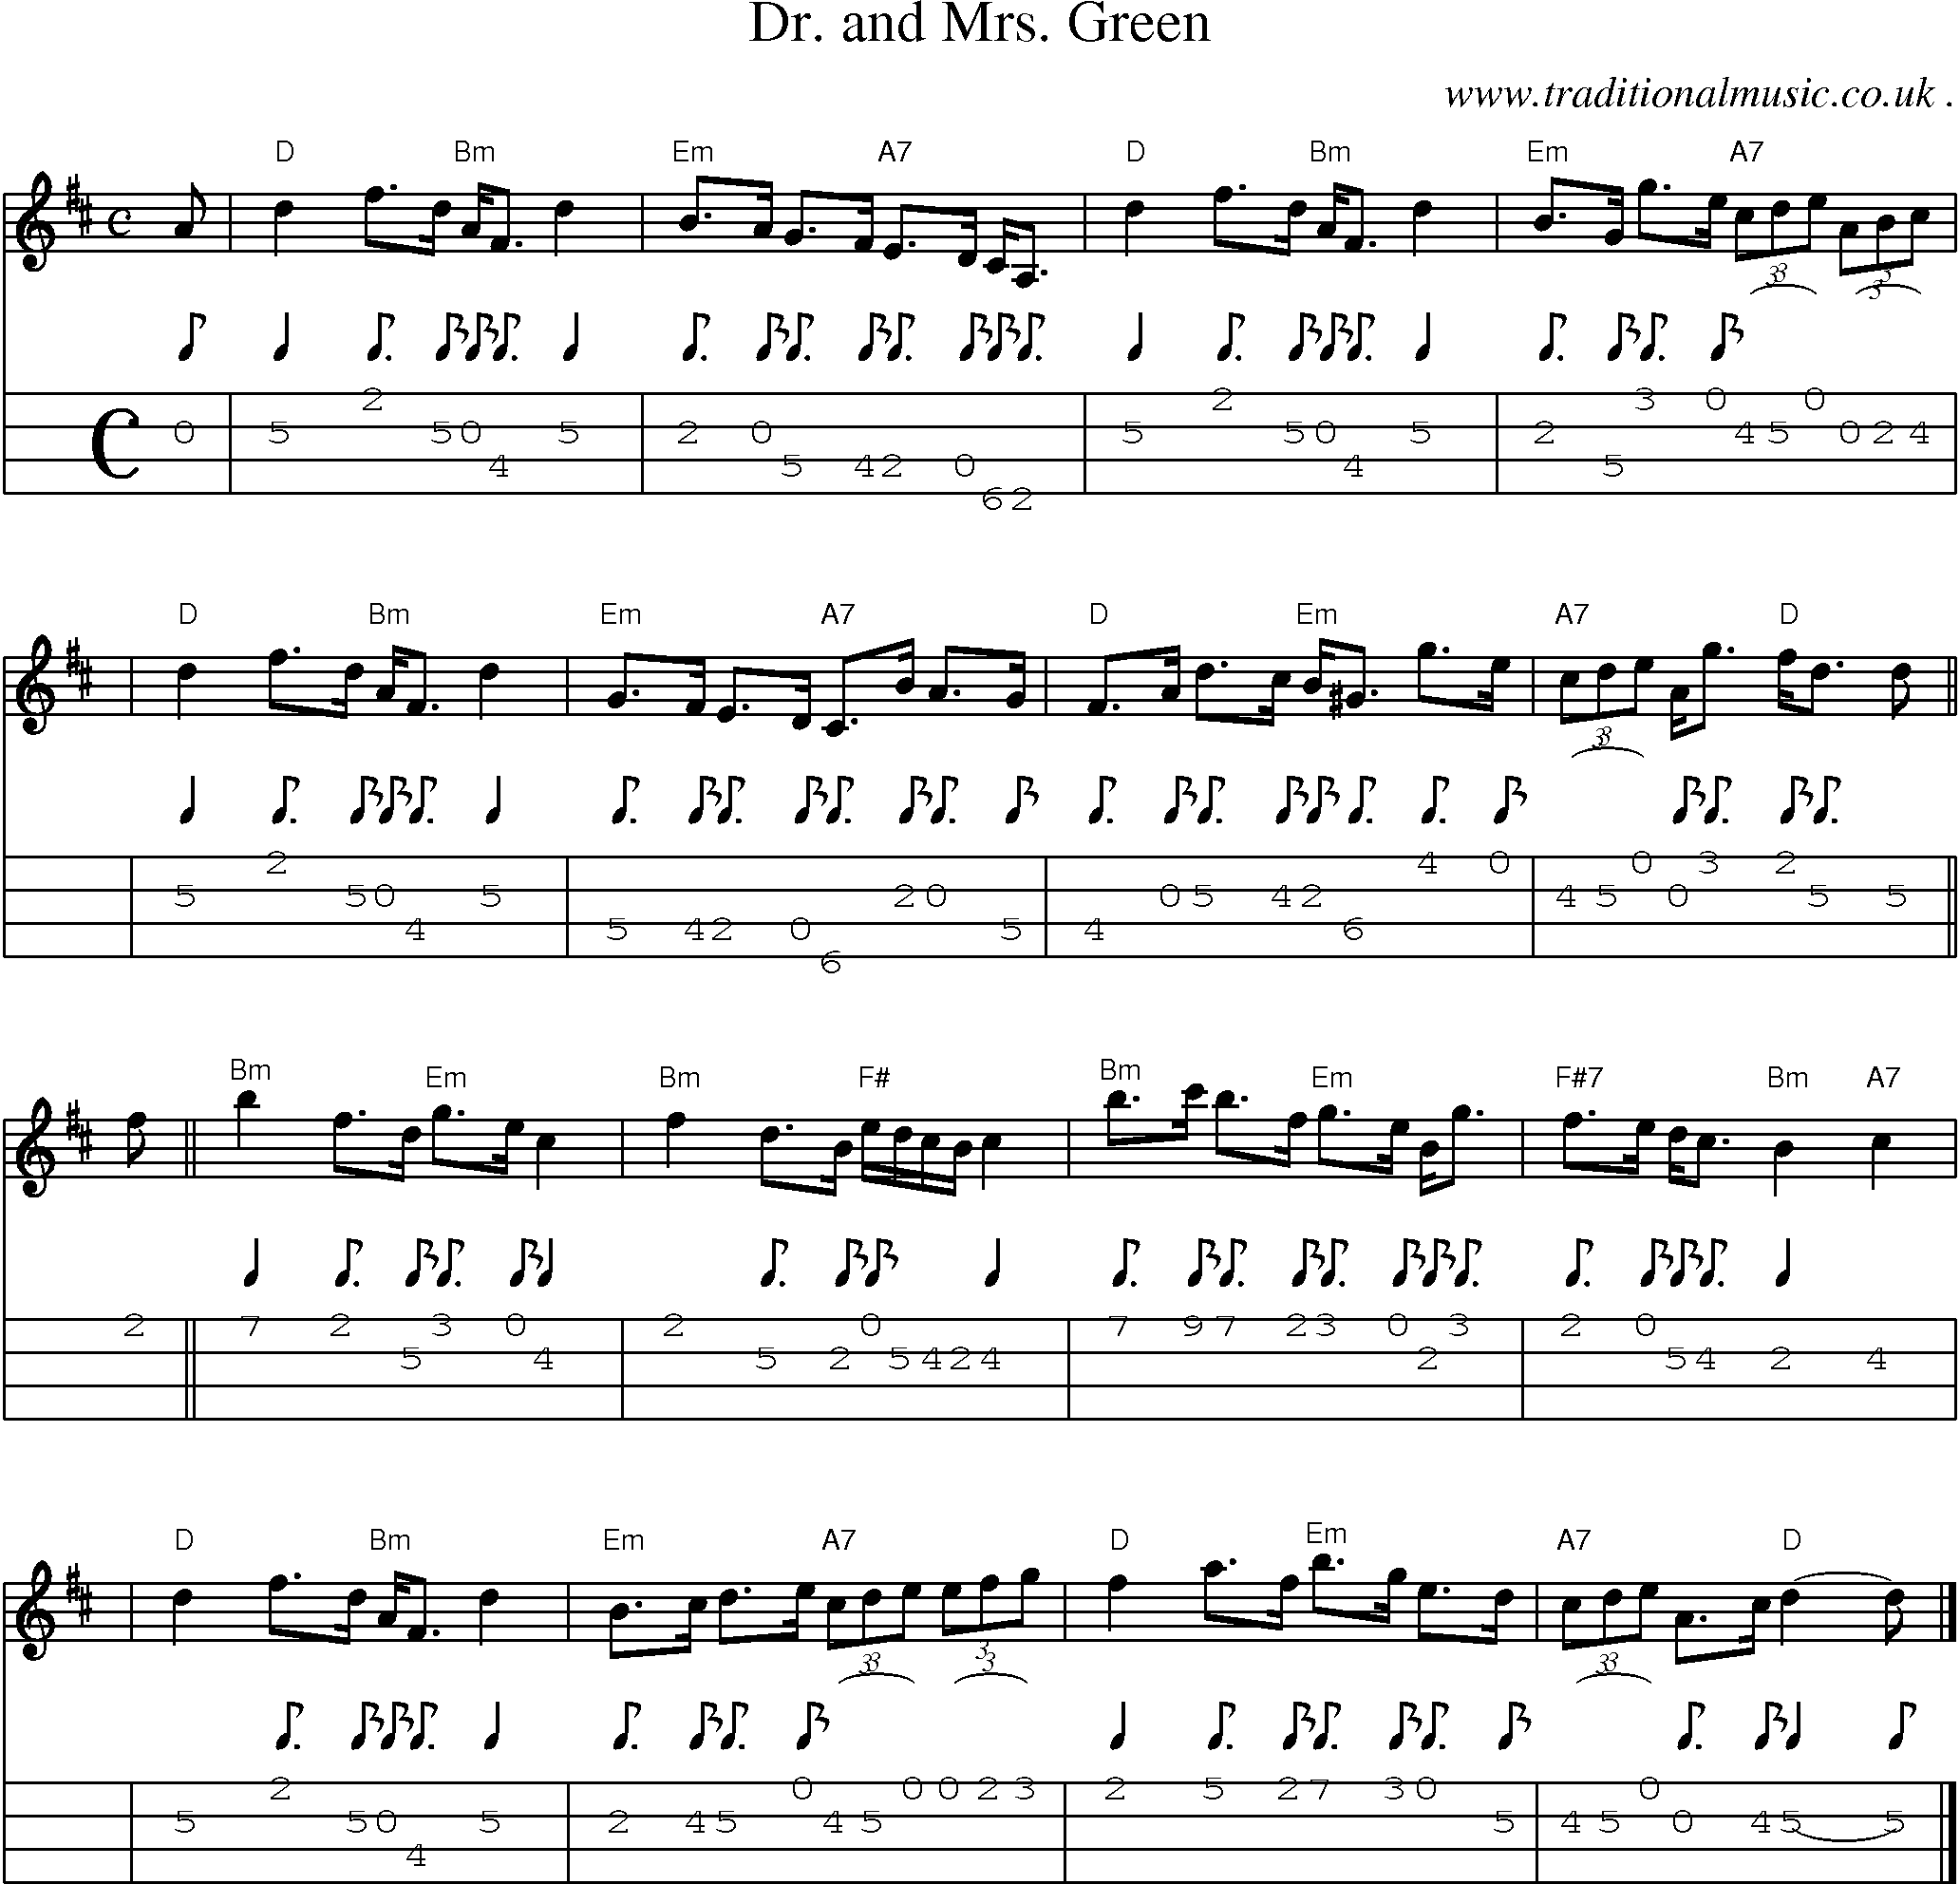 Sheet-music  score, Chords and Mandolin Tabs for Dr And Mrs Green